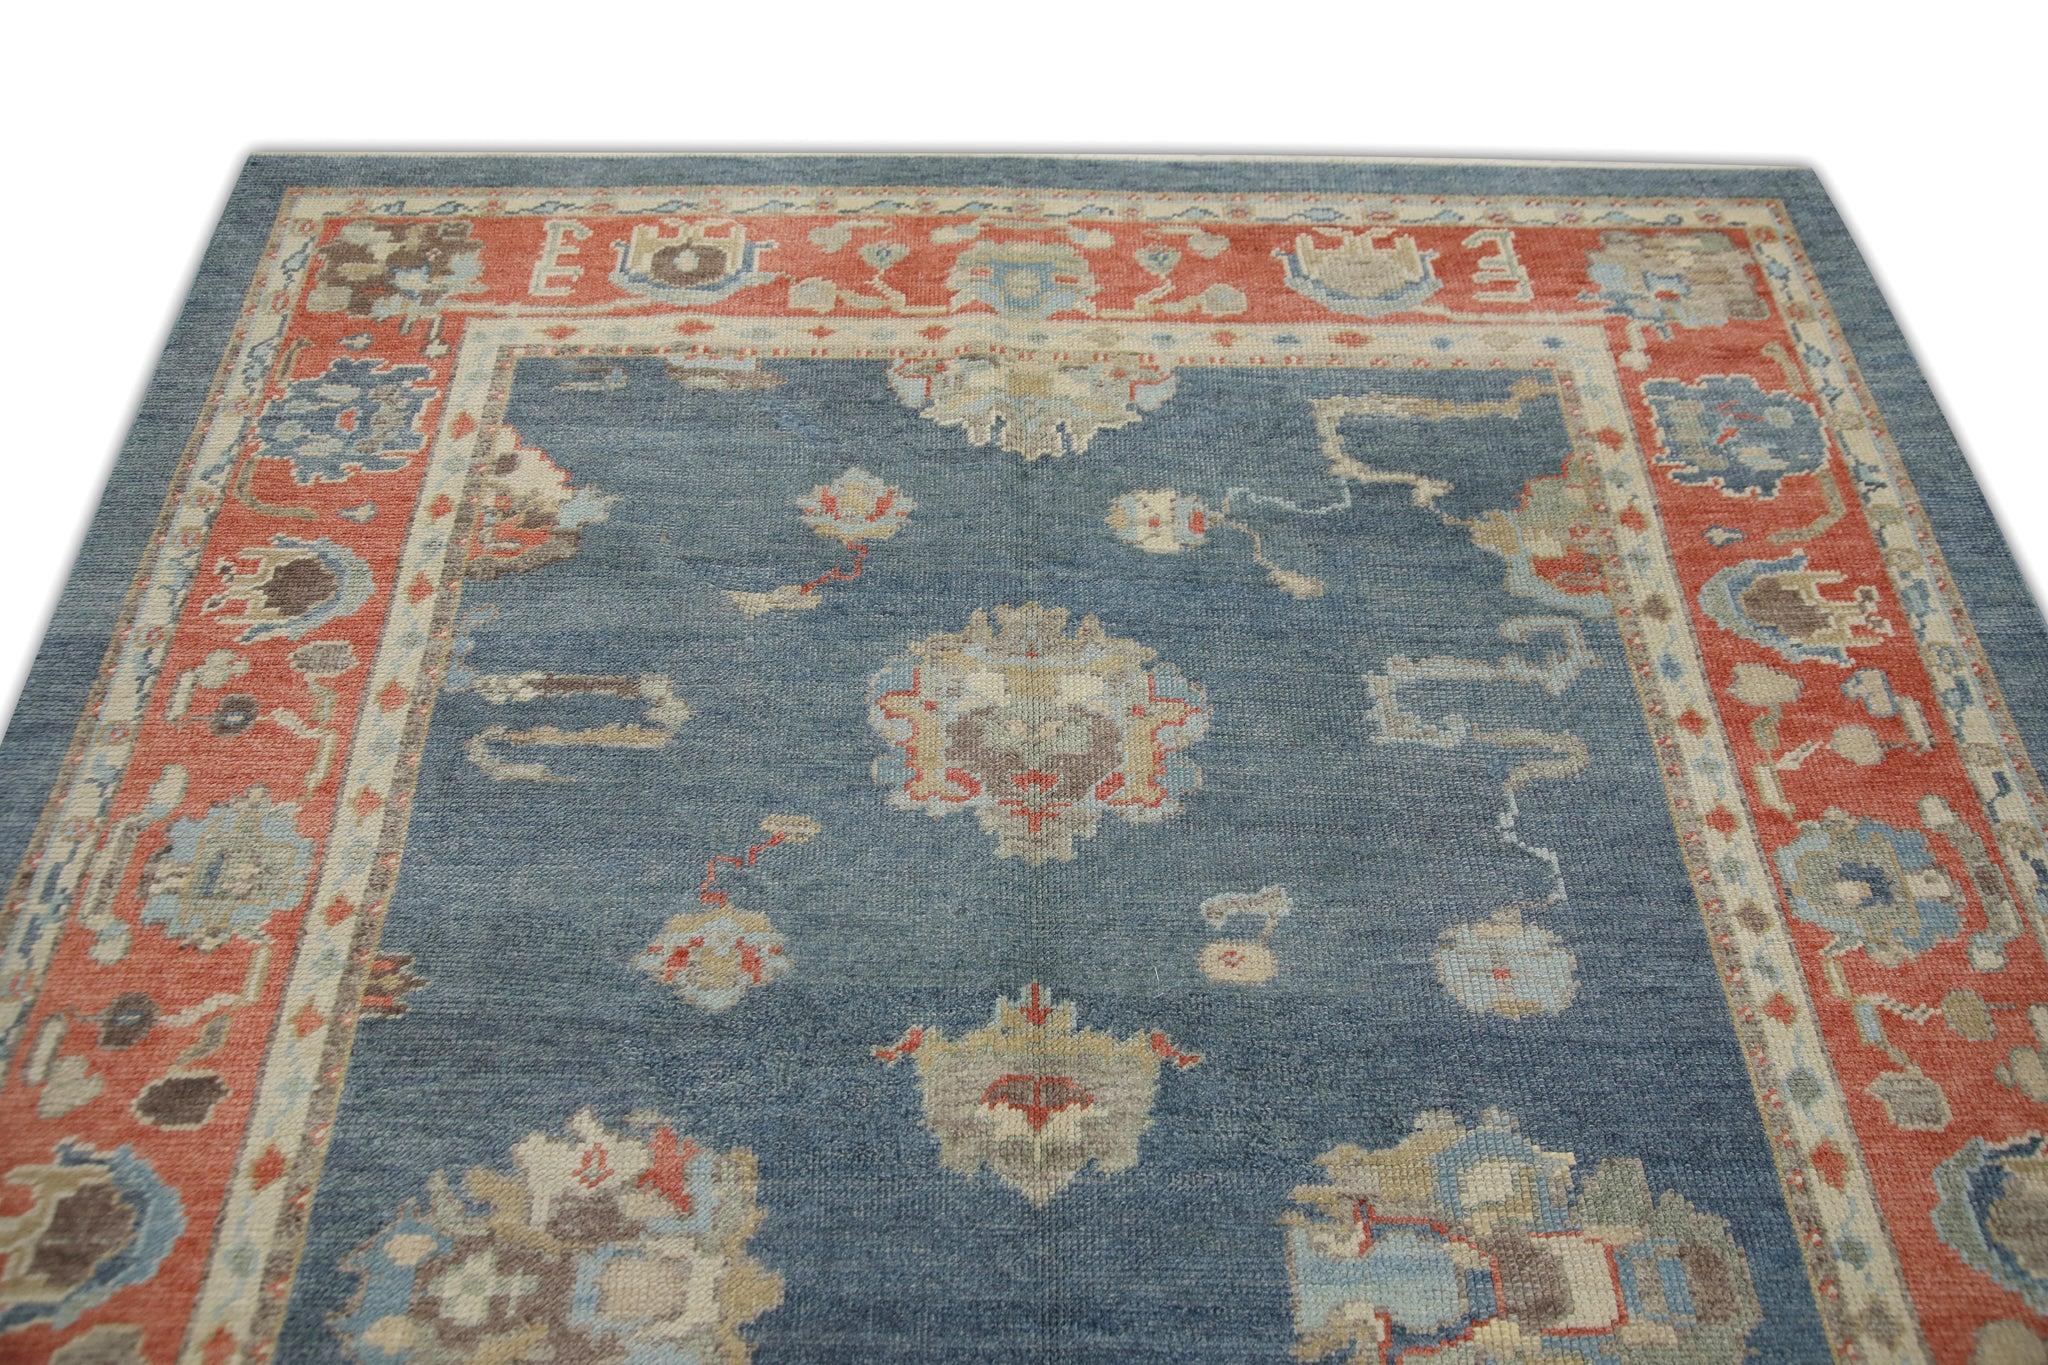 Contemporary Red and Blue Floral Handwoven Wool Turkish Oushak Rug 6' x 8'6